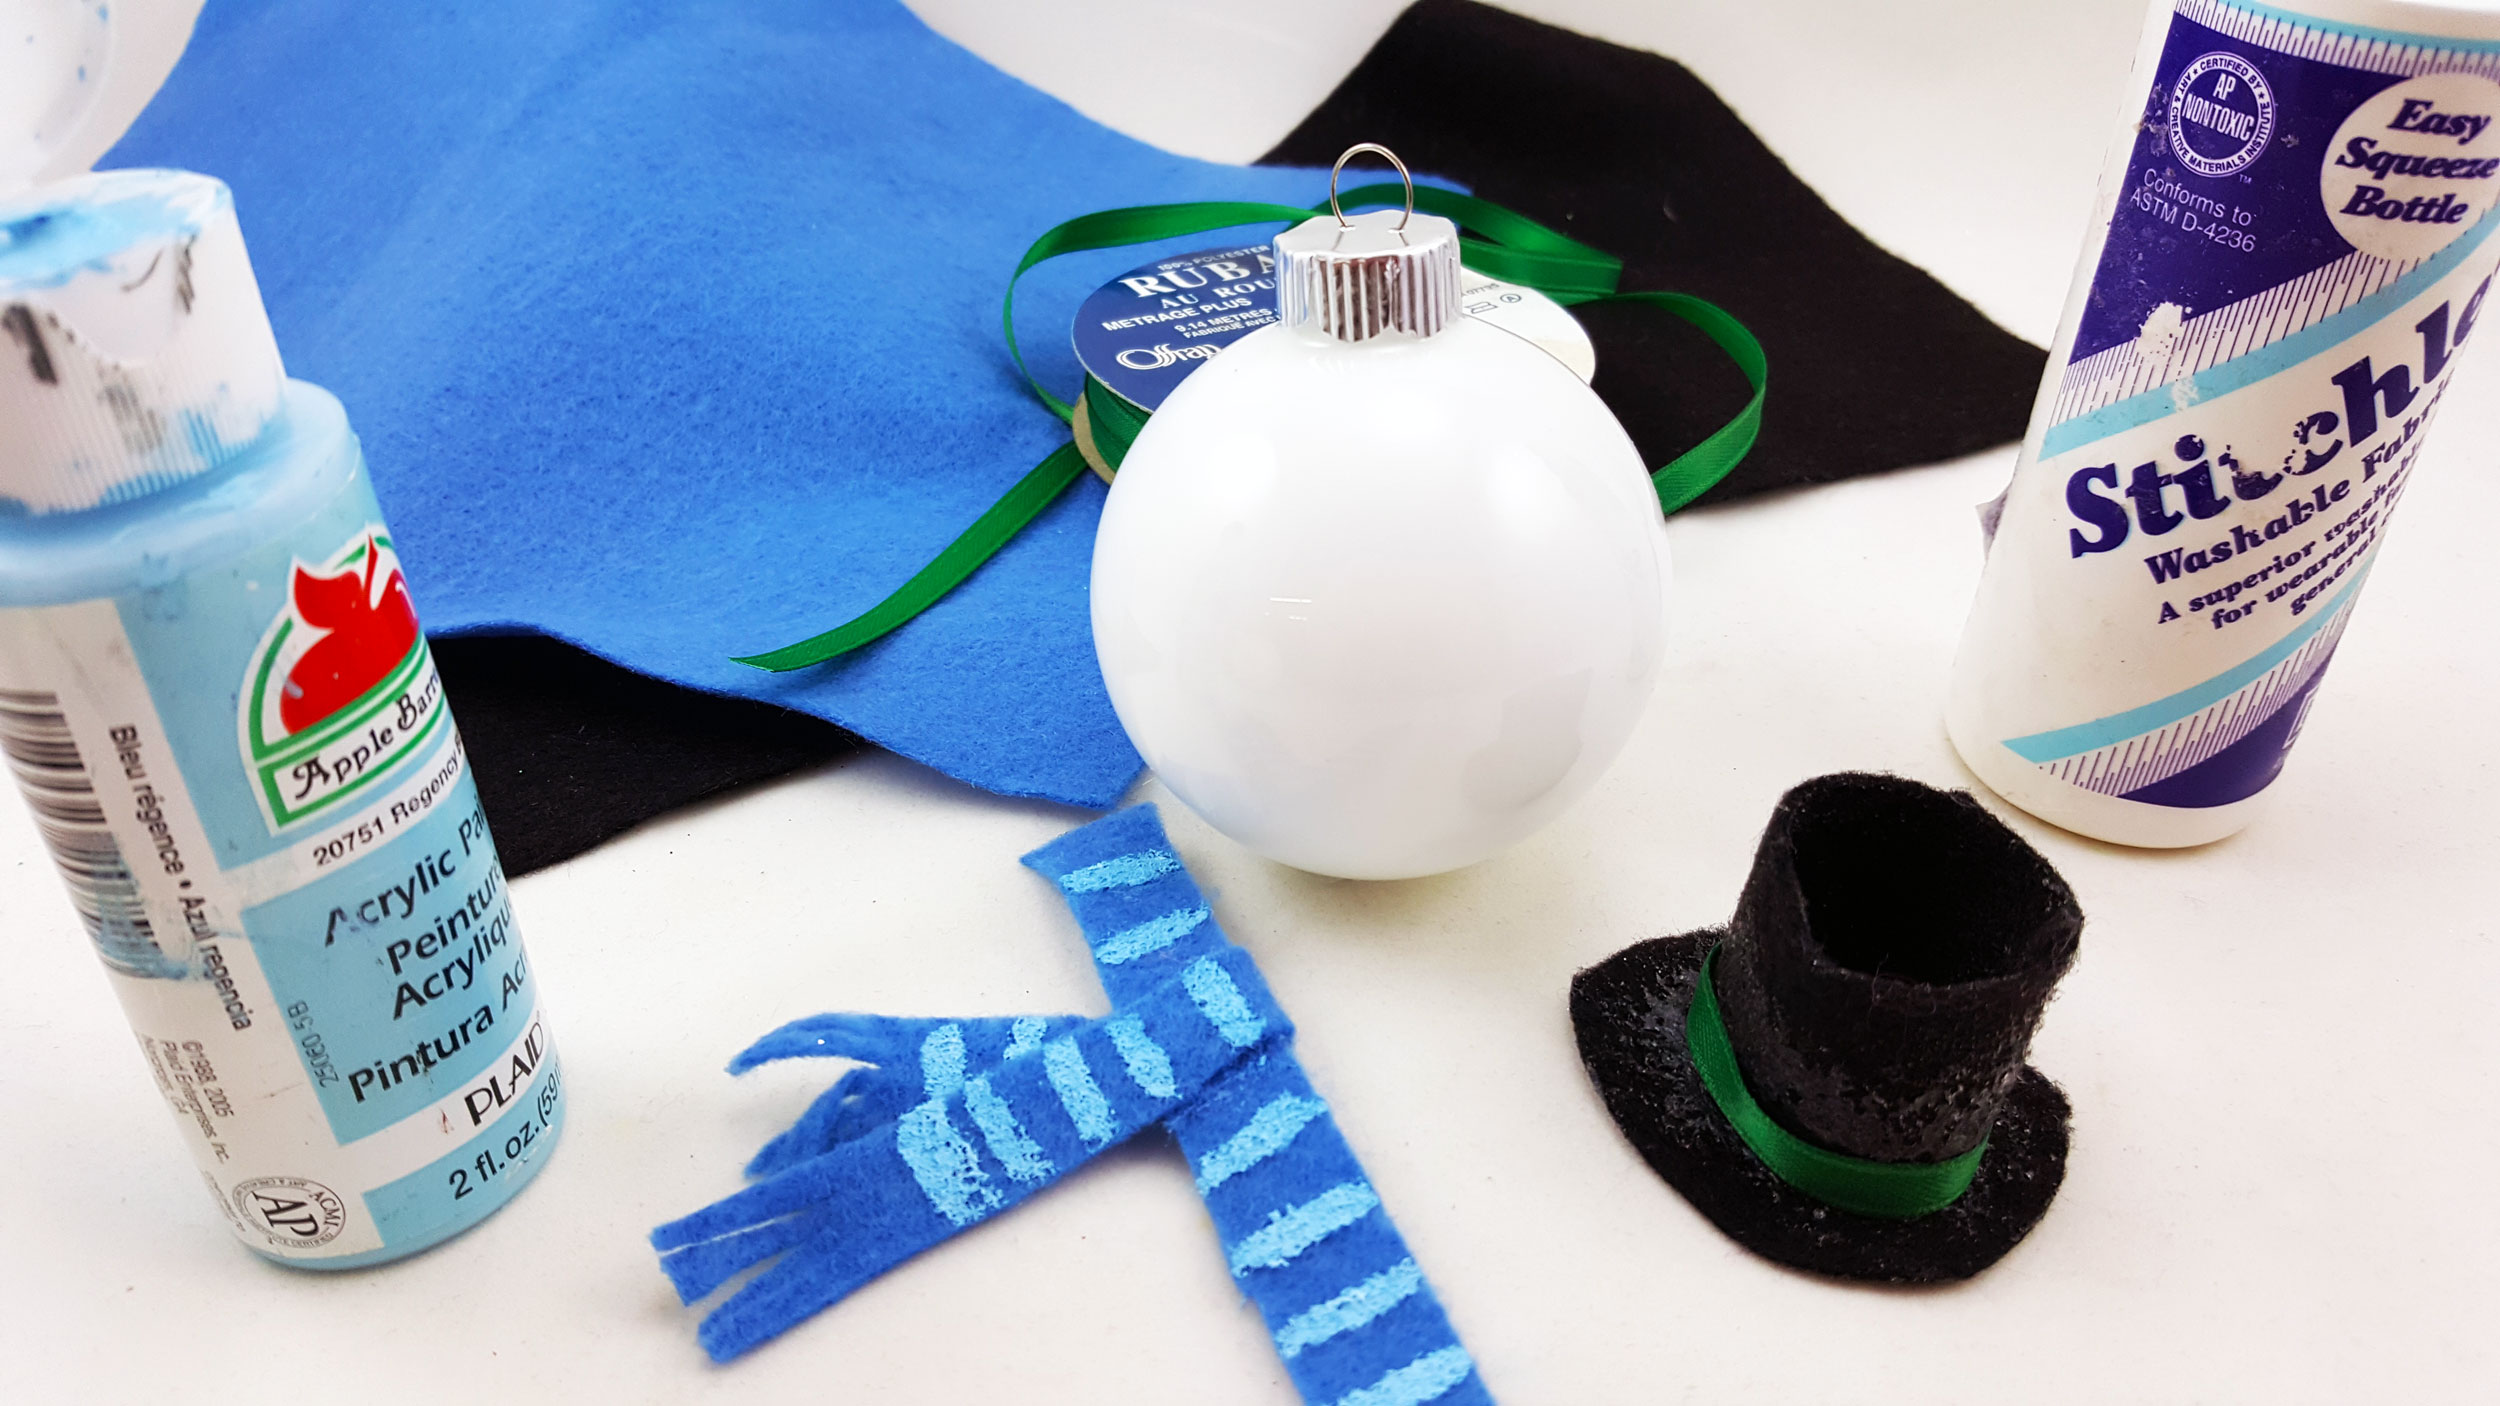 For Chilly, cut black felt pieces for the base of the hat, circumference of the hat, and top of the hat. Then use a green strip for the hat's band, two pieces of blue felt for the scarf, and then use paint to make light stripes on the scarf. | OrnamentShop.com